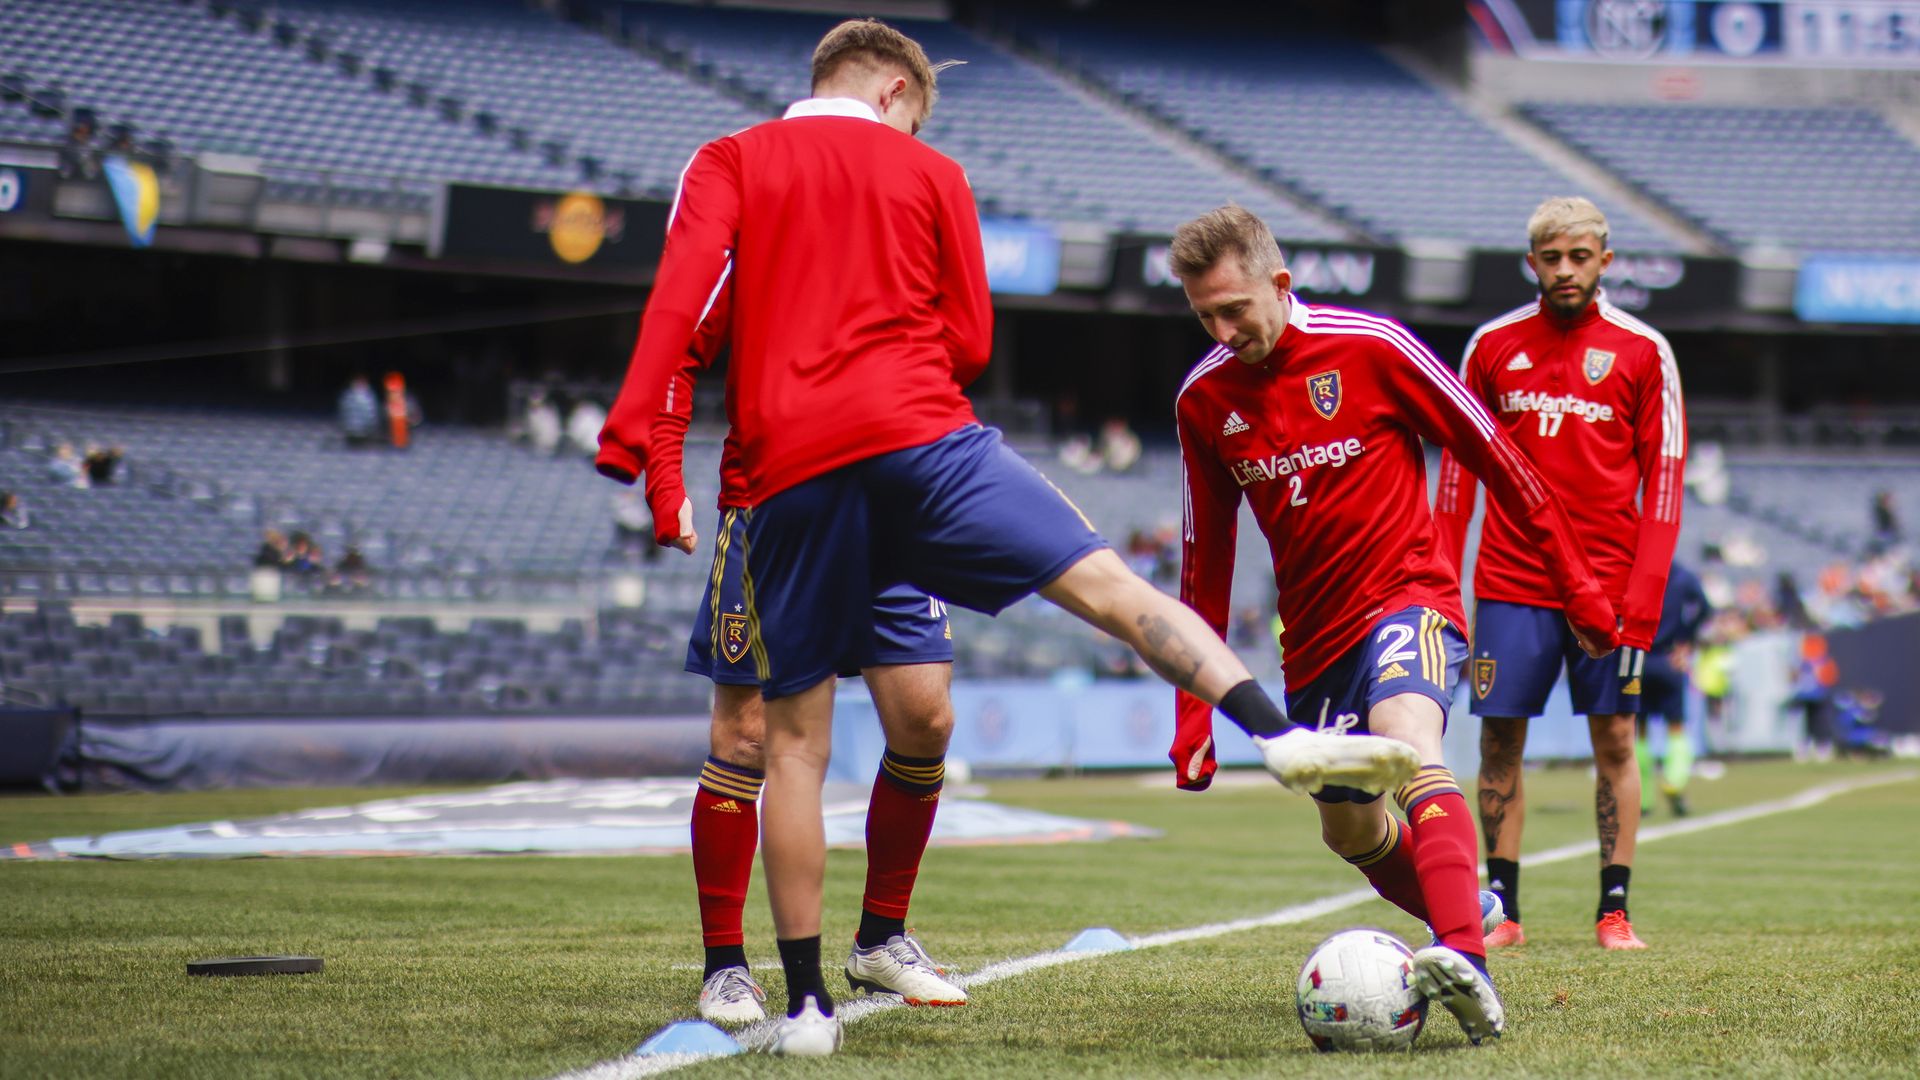 Real Salt Lake players warm up before their MLS soccer match against New York City FC at the Yankee Stadium Sunday, April 17, 2022, in New York.